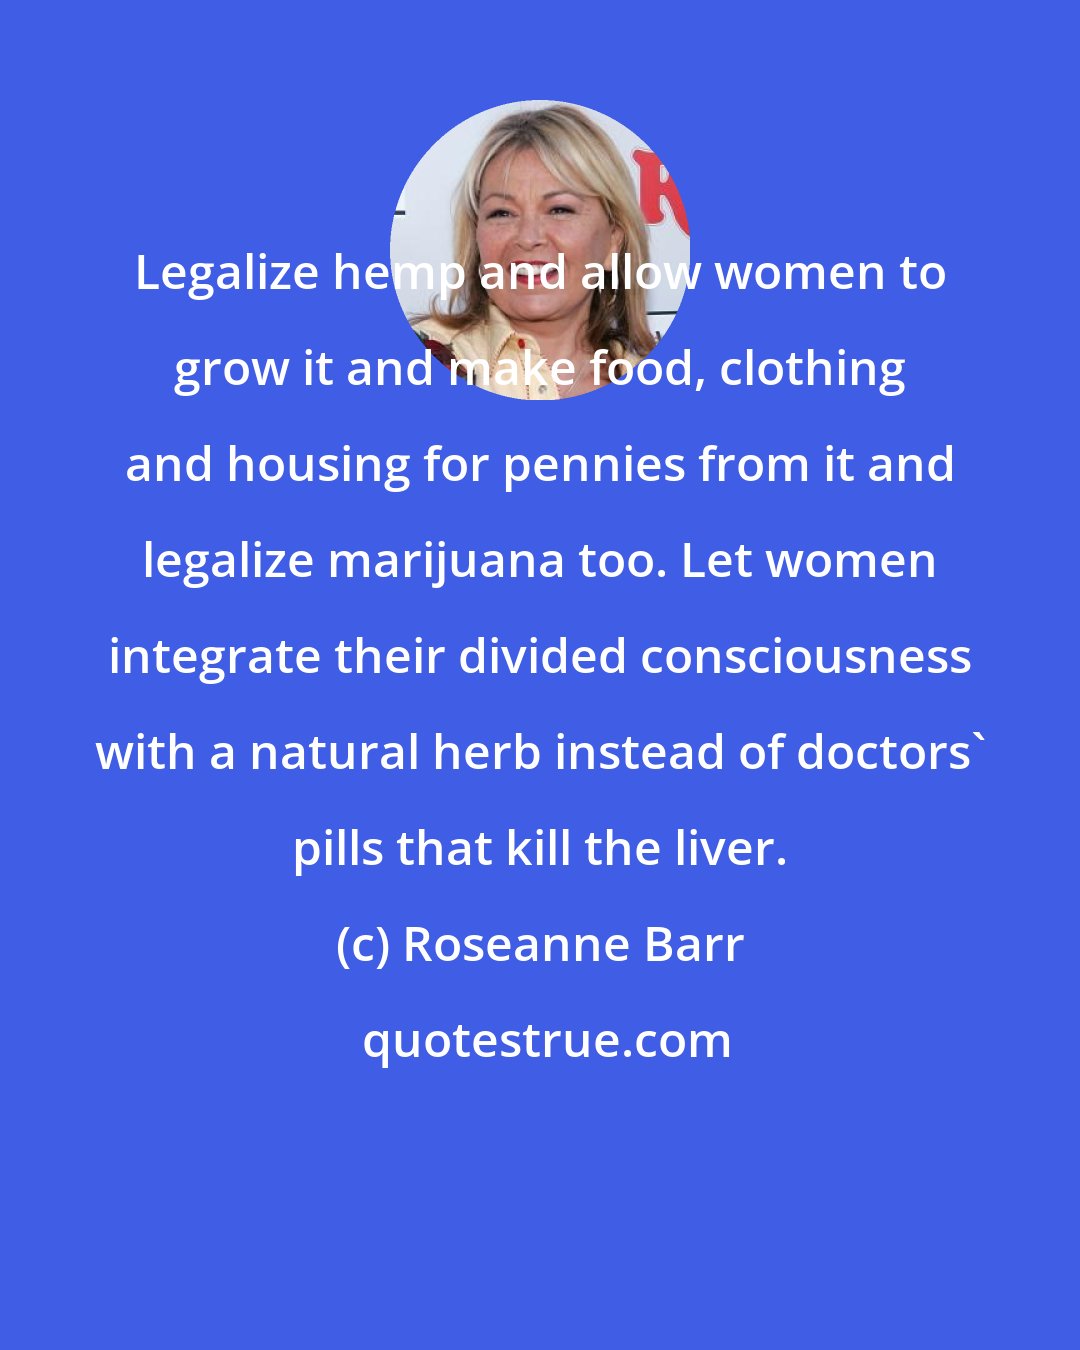 Roseanne Barr: Legalize hemp and allow women to grow it and make food, clothing and housing for pennies from it and legalize marijuana too. Let women integrate their divided consciousness with a natural herb instead of doctors' pills that kill the liver.